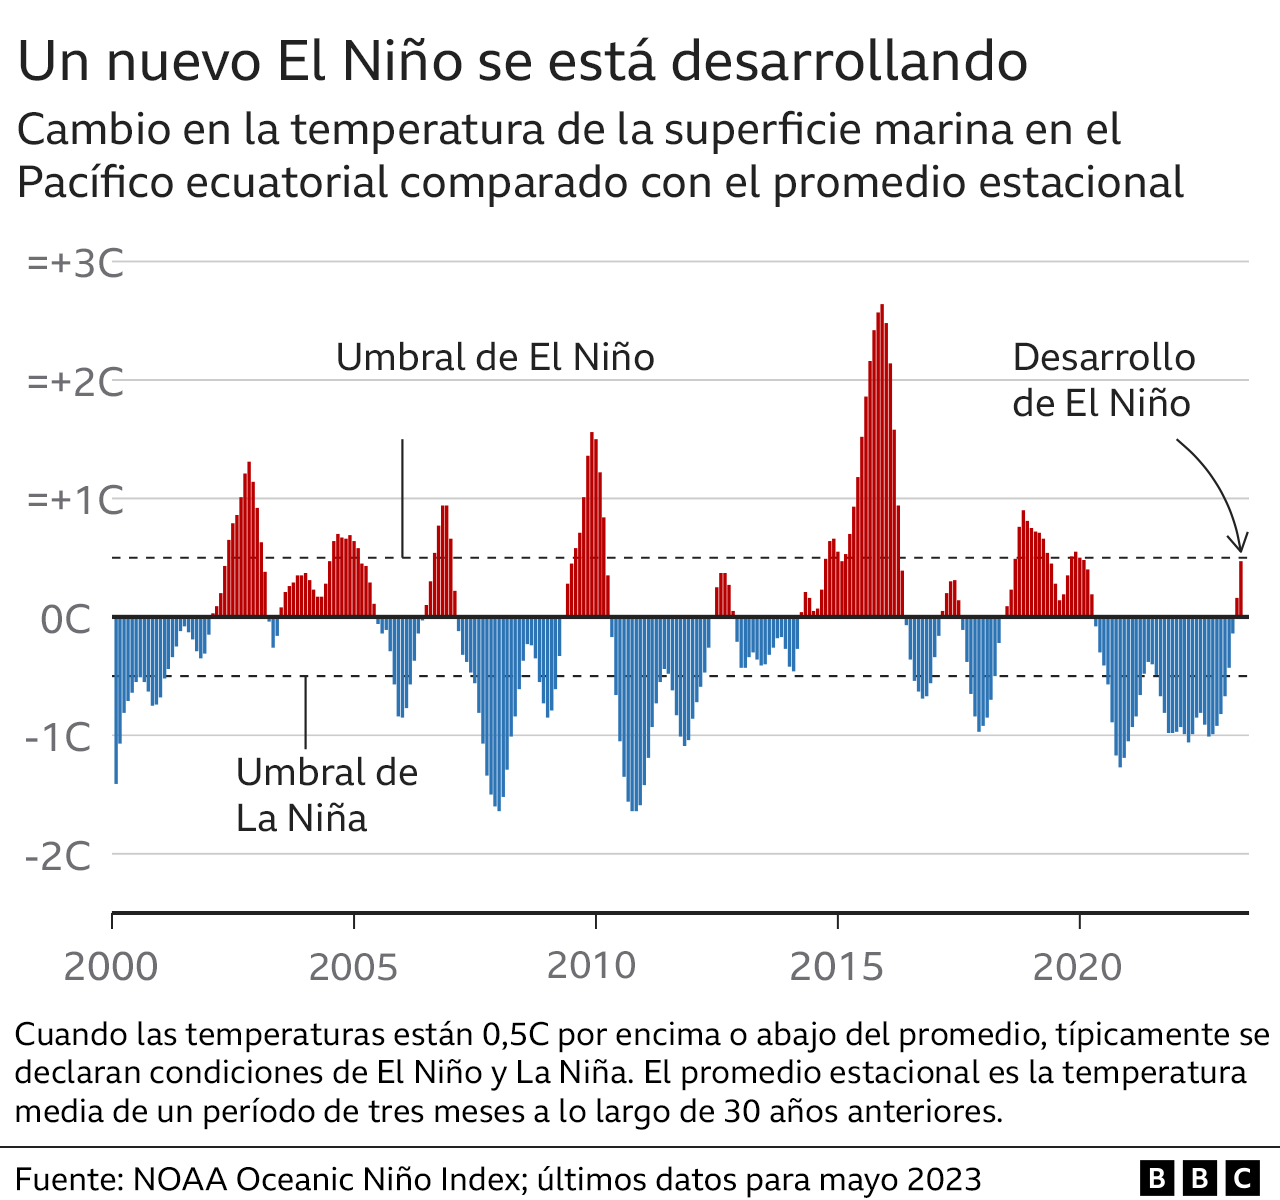 Graph showing temperatures reached by El Niño and La Niña over the past 20 years